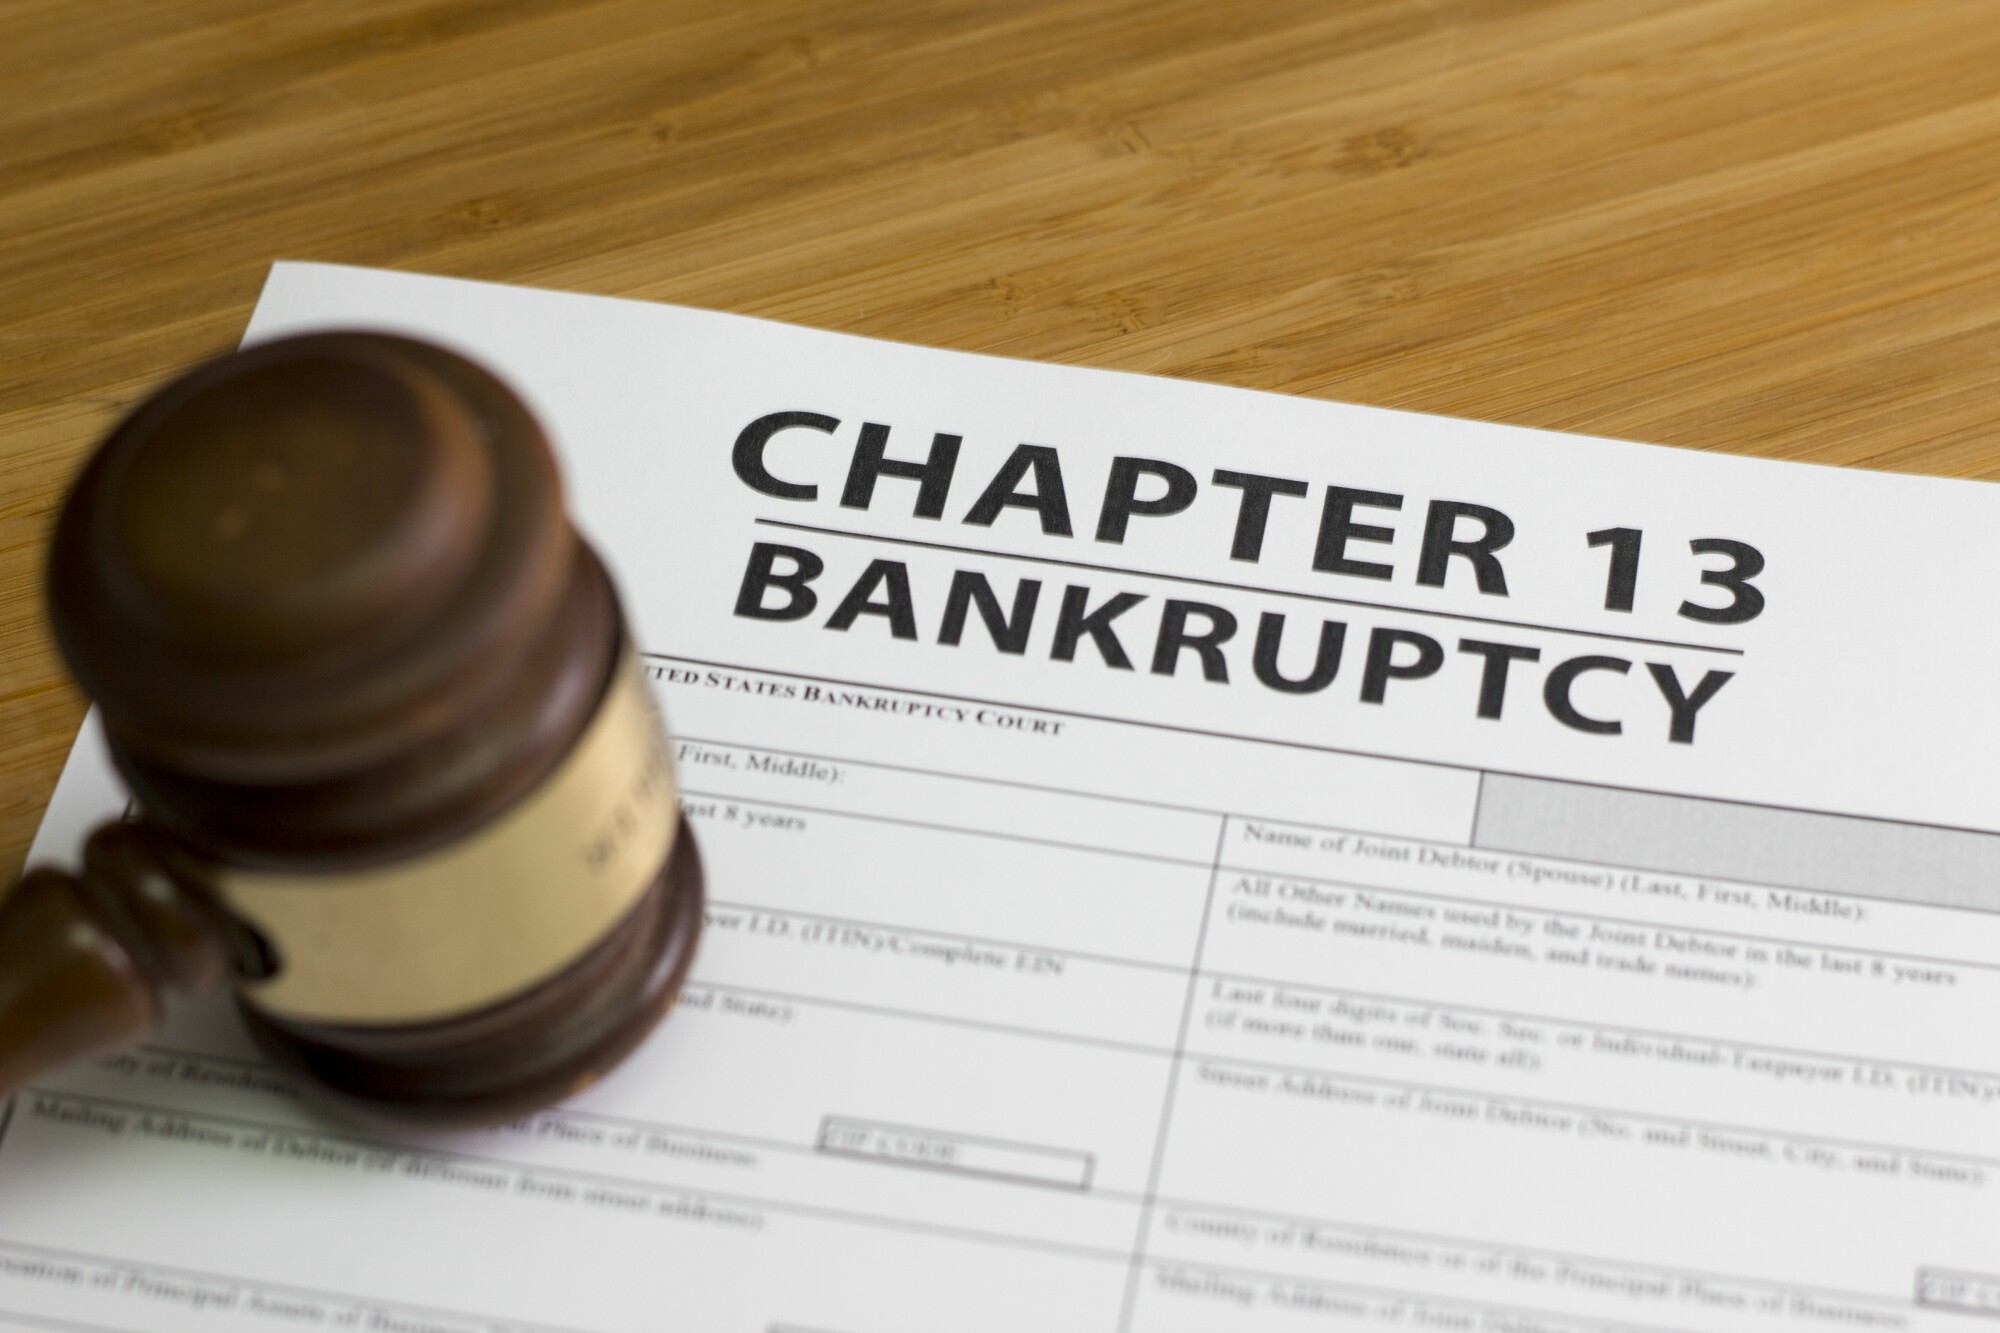 Chapter 13 Bankruptcy Form with Gavel